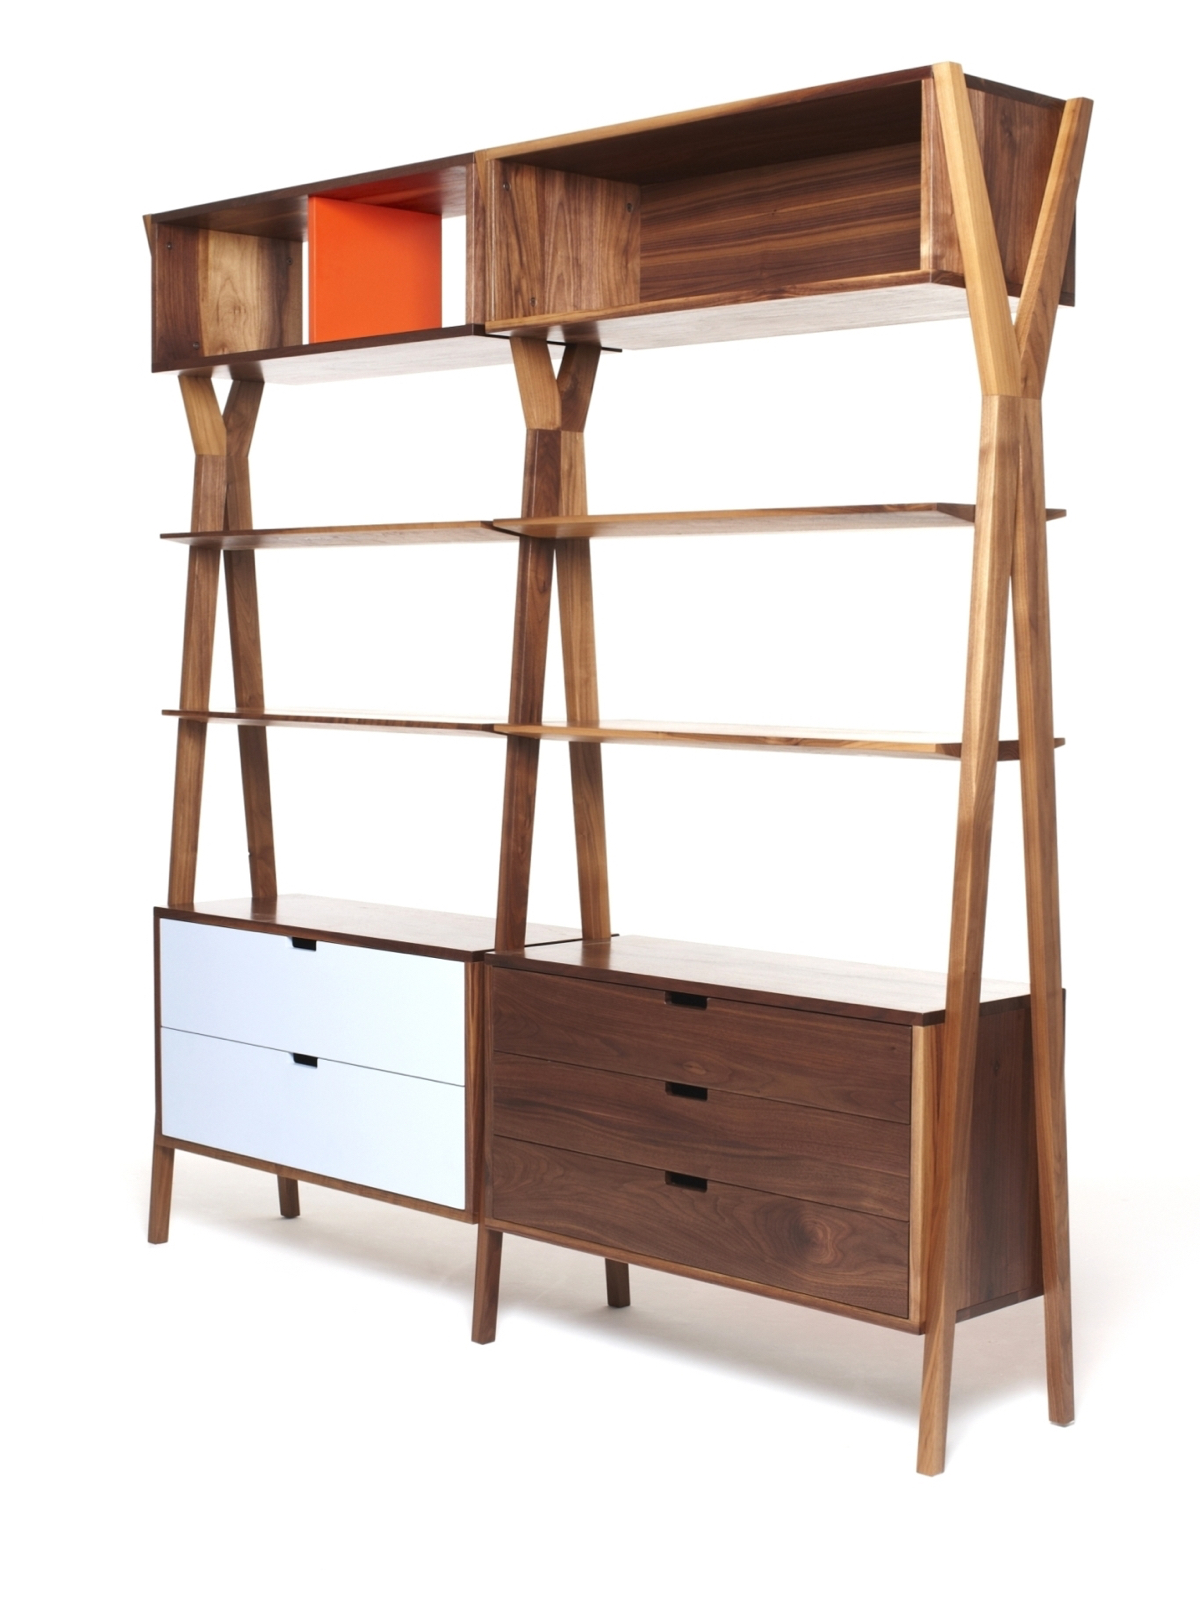 Modular Shelving Systems That Are Chic, Modular Shelving Wood